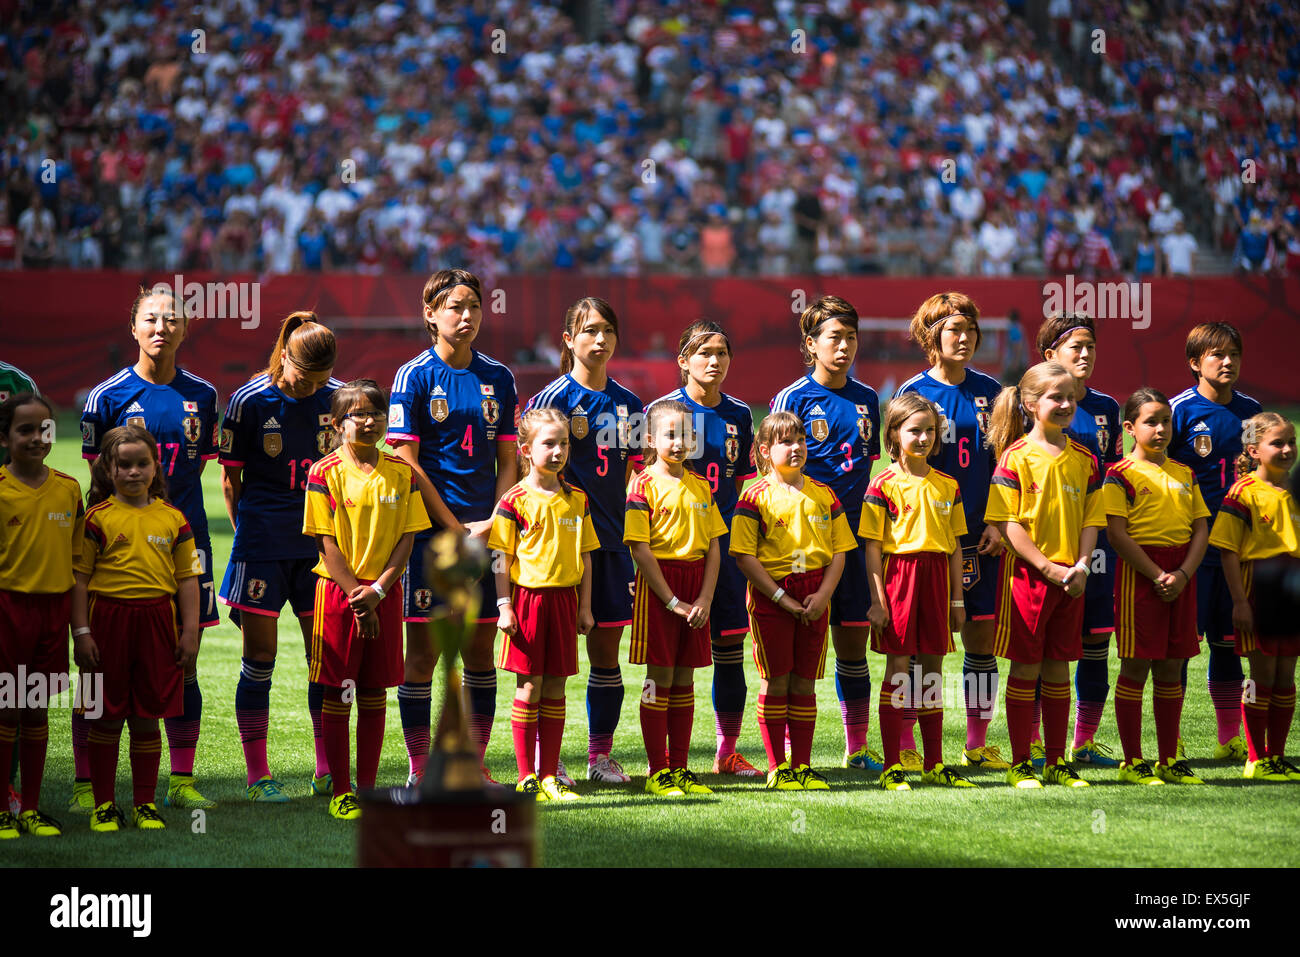 Vancouver, Canada. 5th July, 2015. Team Japan ahead of the World Cup final match between the USA and Japan at the FIFA Women's World Cup Canada 2015 at BC Place Stadium. USA won the match 5-2. © Matt Jacques/Alamy Live News Credit:  Matt Jacques/Alamy Live News Stock Photo